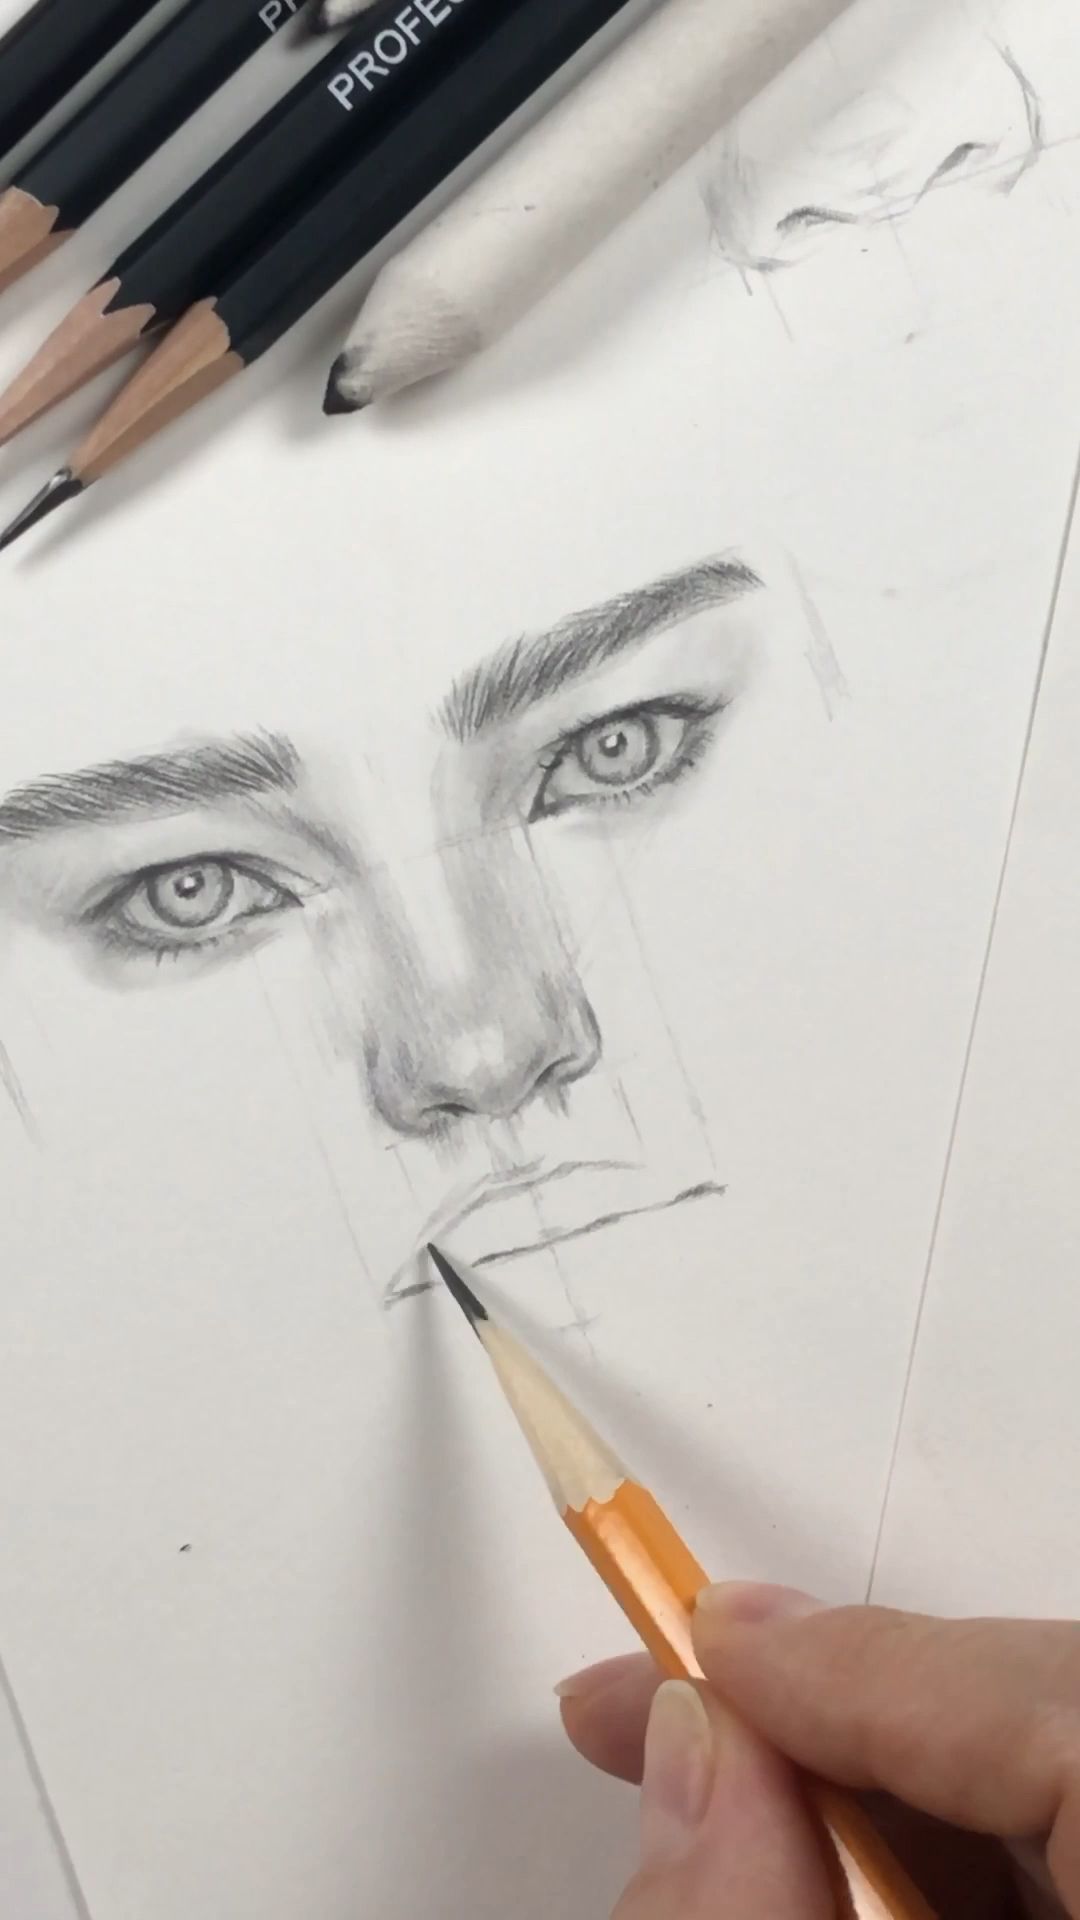 Practicing freehand drawing, Face Proportions by Nadia Coolrista - Practicing freehand drawing, Face Proportions by Nadia Coolrista -   17 beauty Art sketches ideas